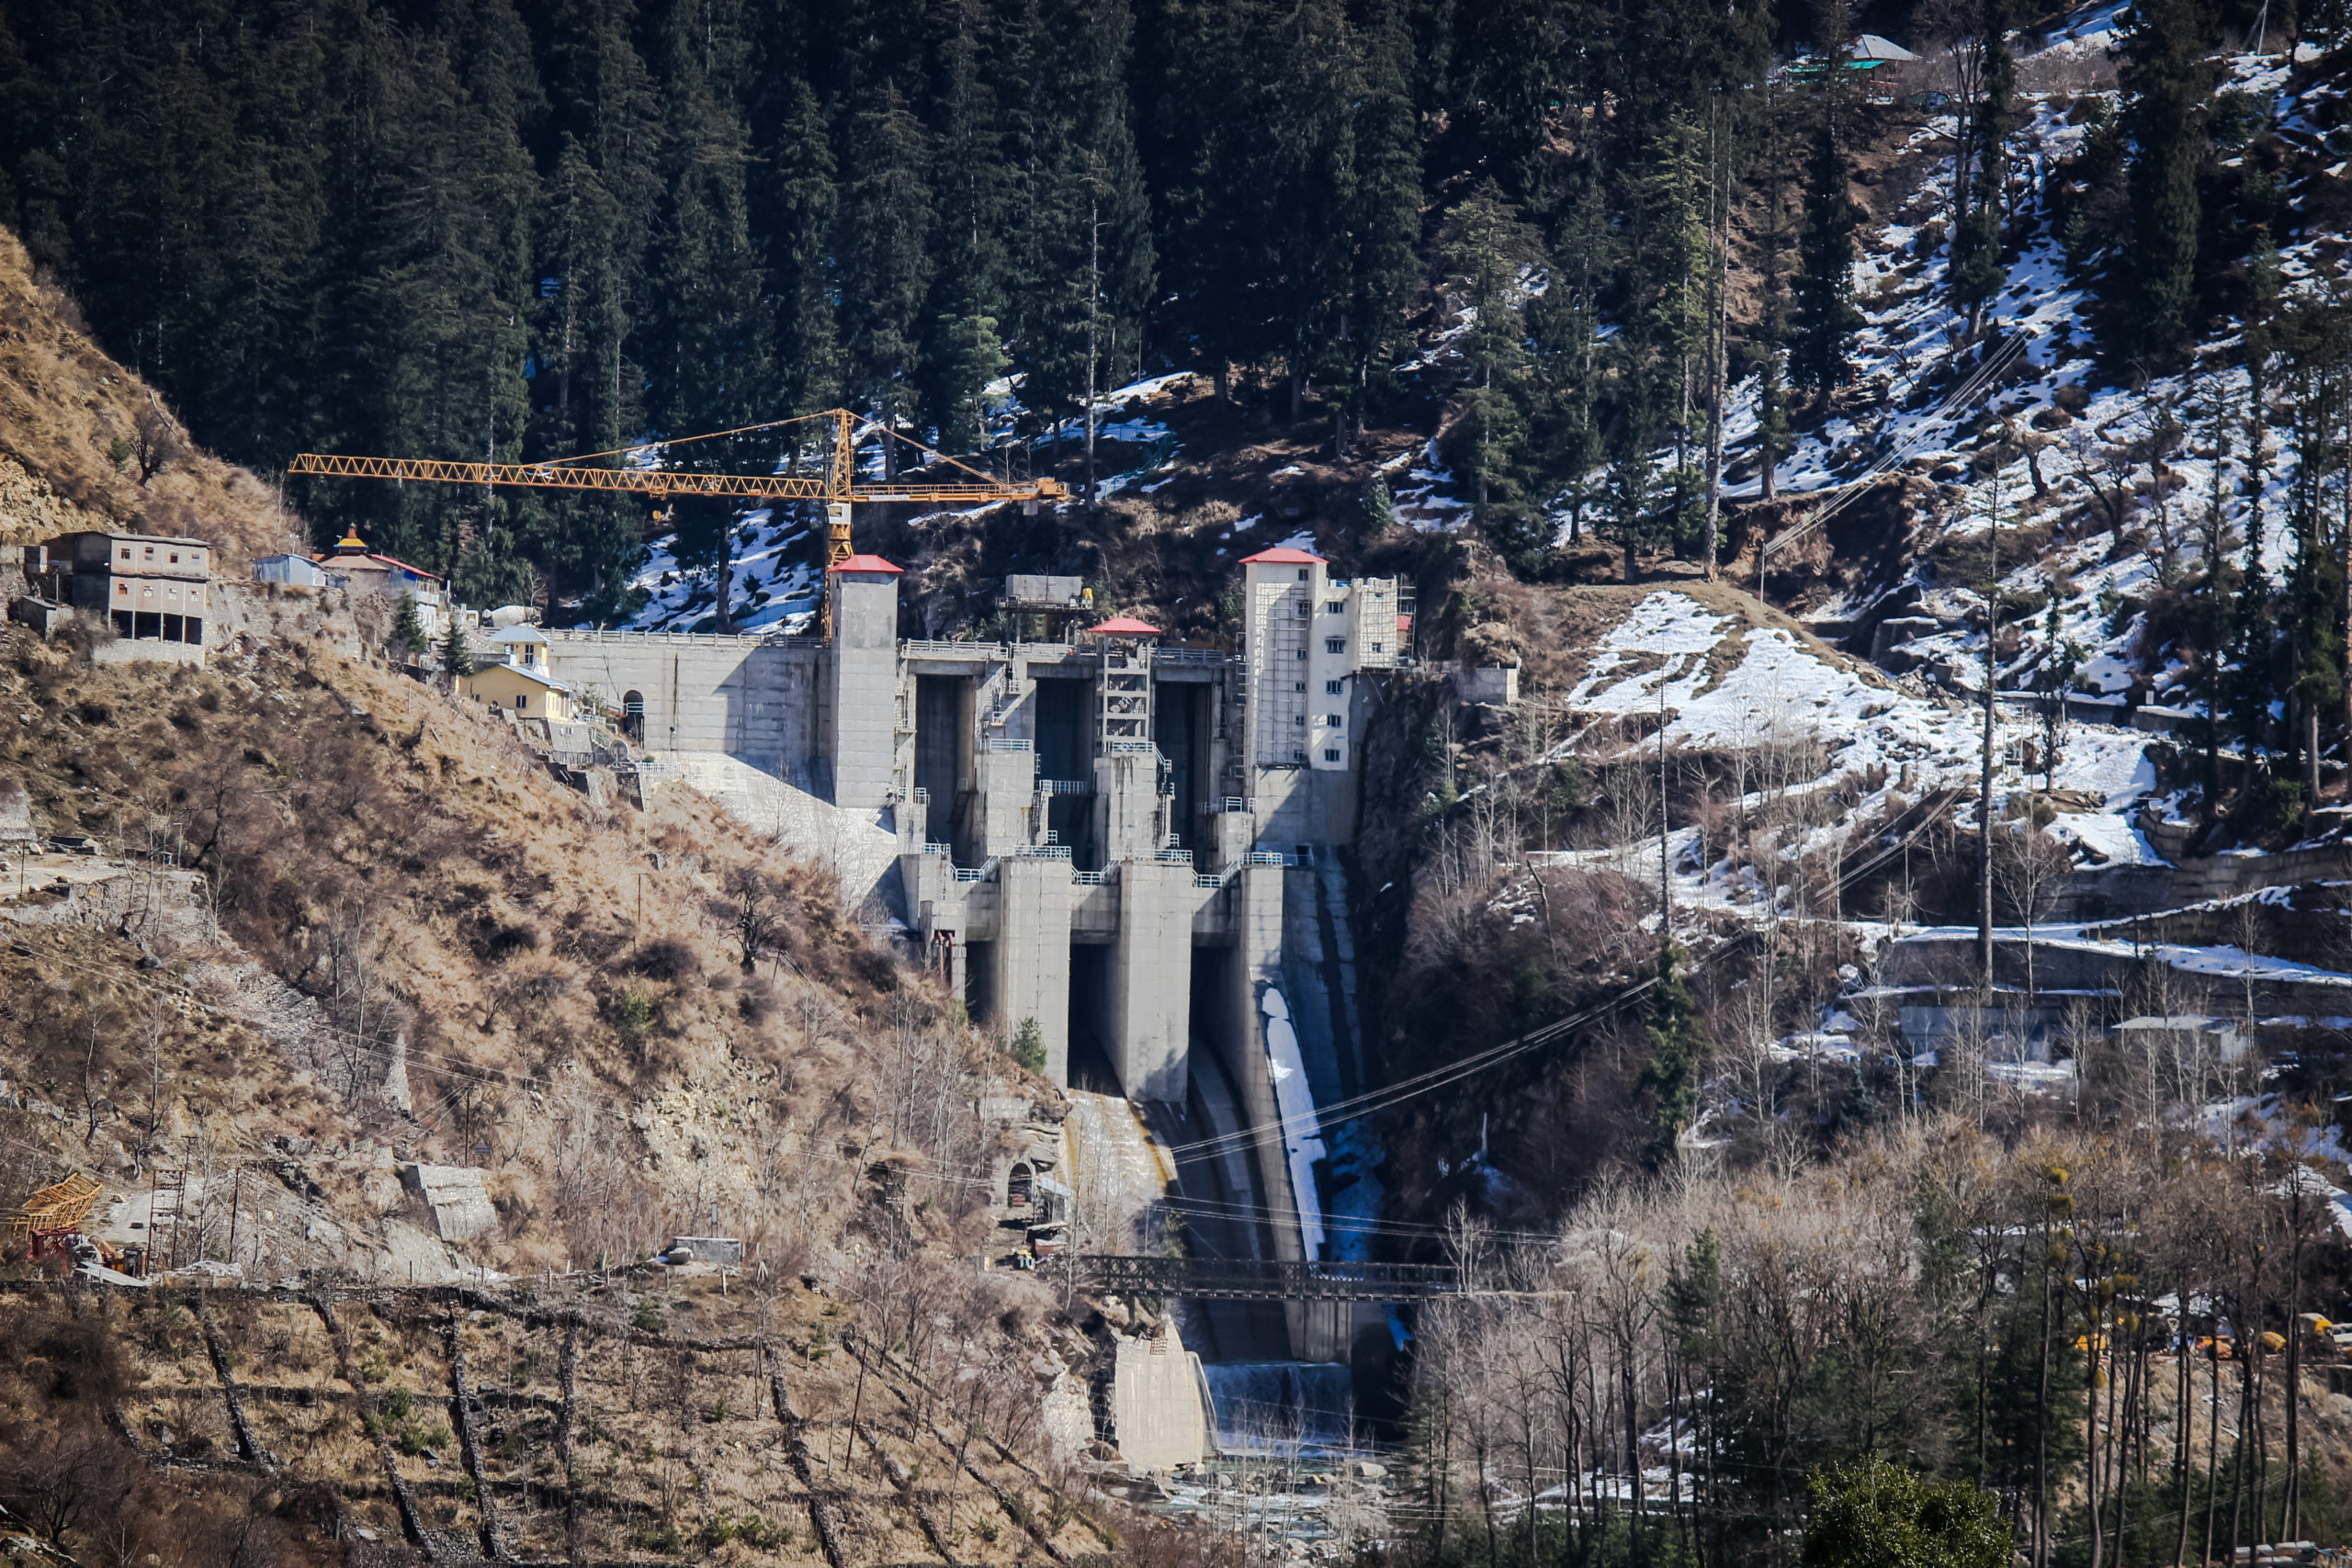 <p>The Parbati II hydroelectric project in Himachal Pradesh, where 27-year-old Amar Chand was killed recently in an accident (Image: Sumit Mahar)</p>